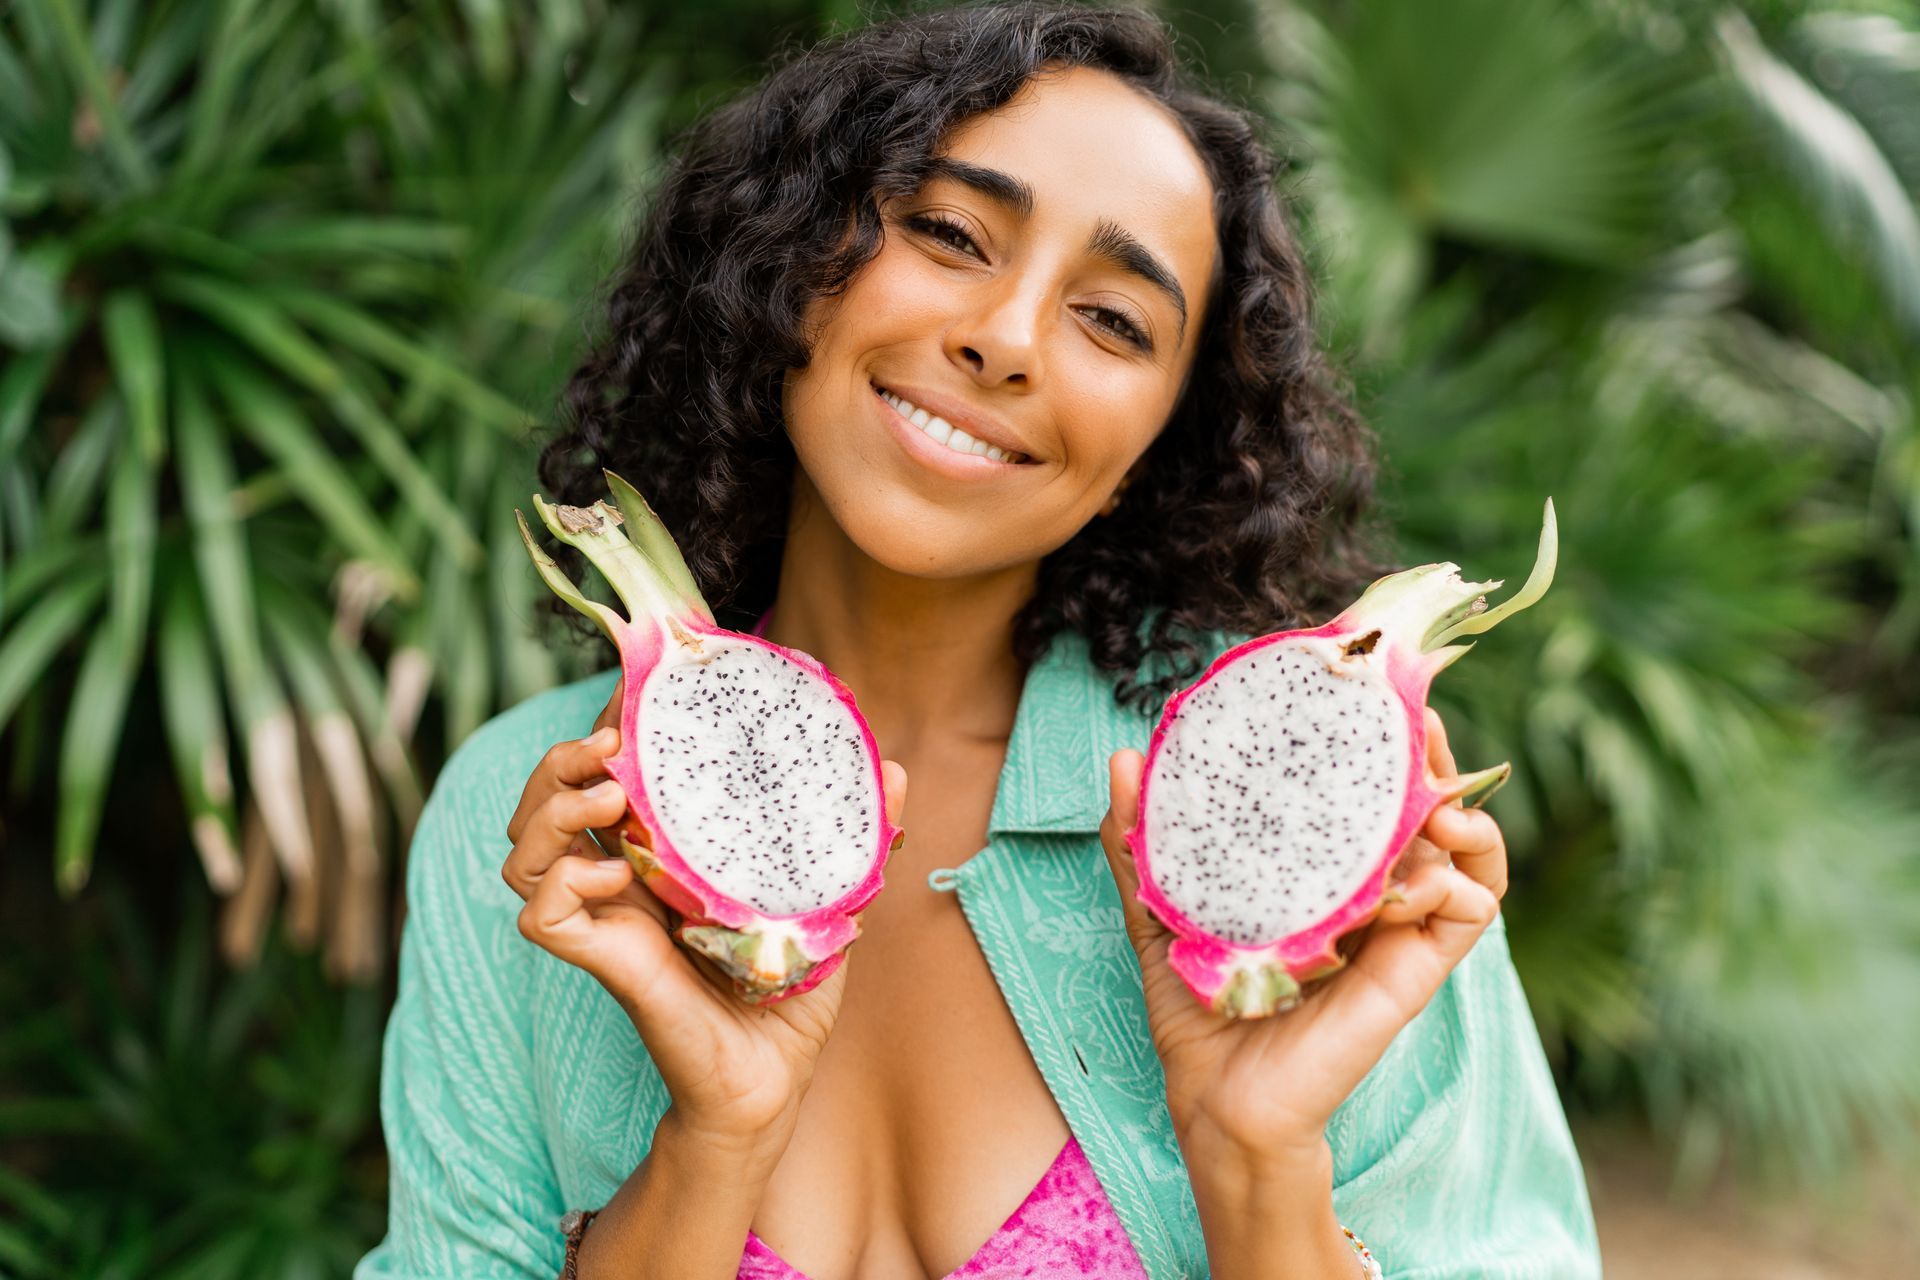 A woman is holding two dragon fruits in her hands and smiling.